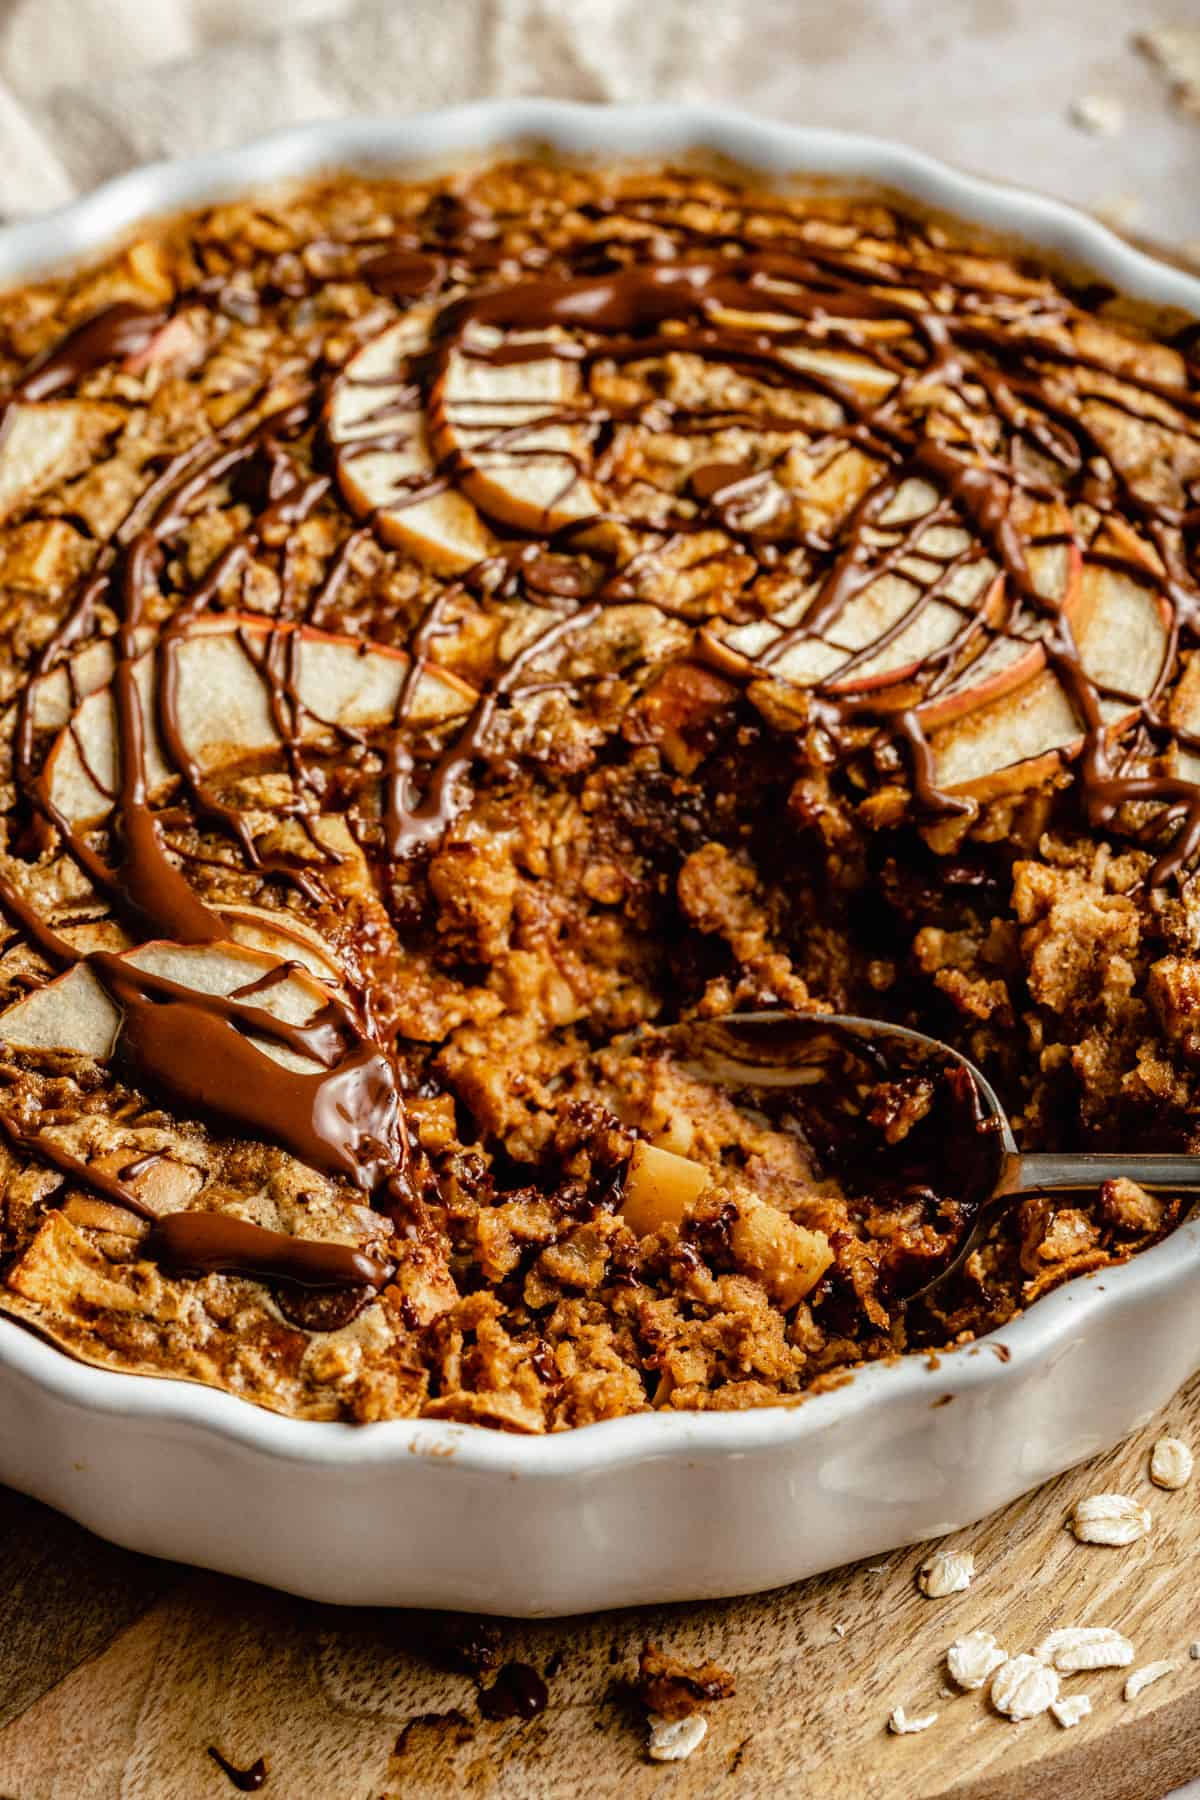 Close up of a spoon serving in a baked oatmeal dish having served up a portion.